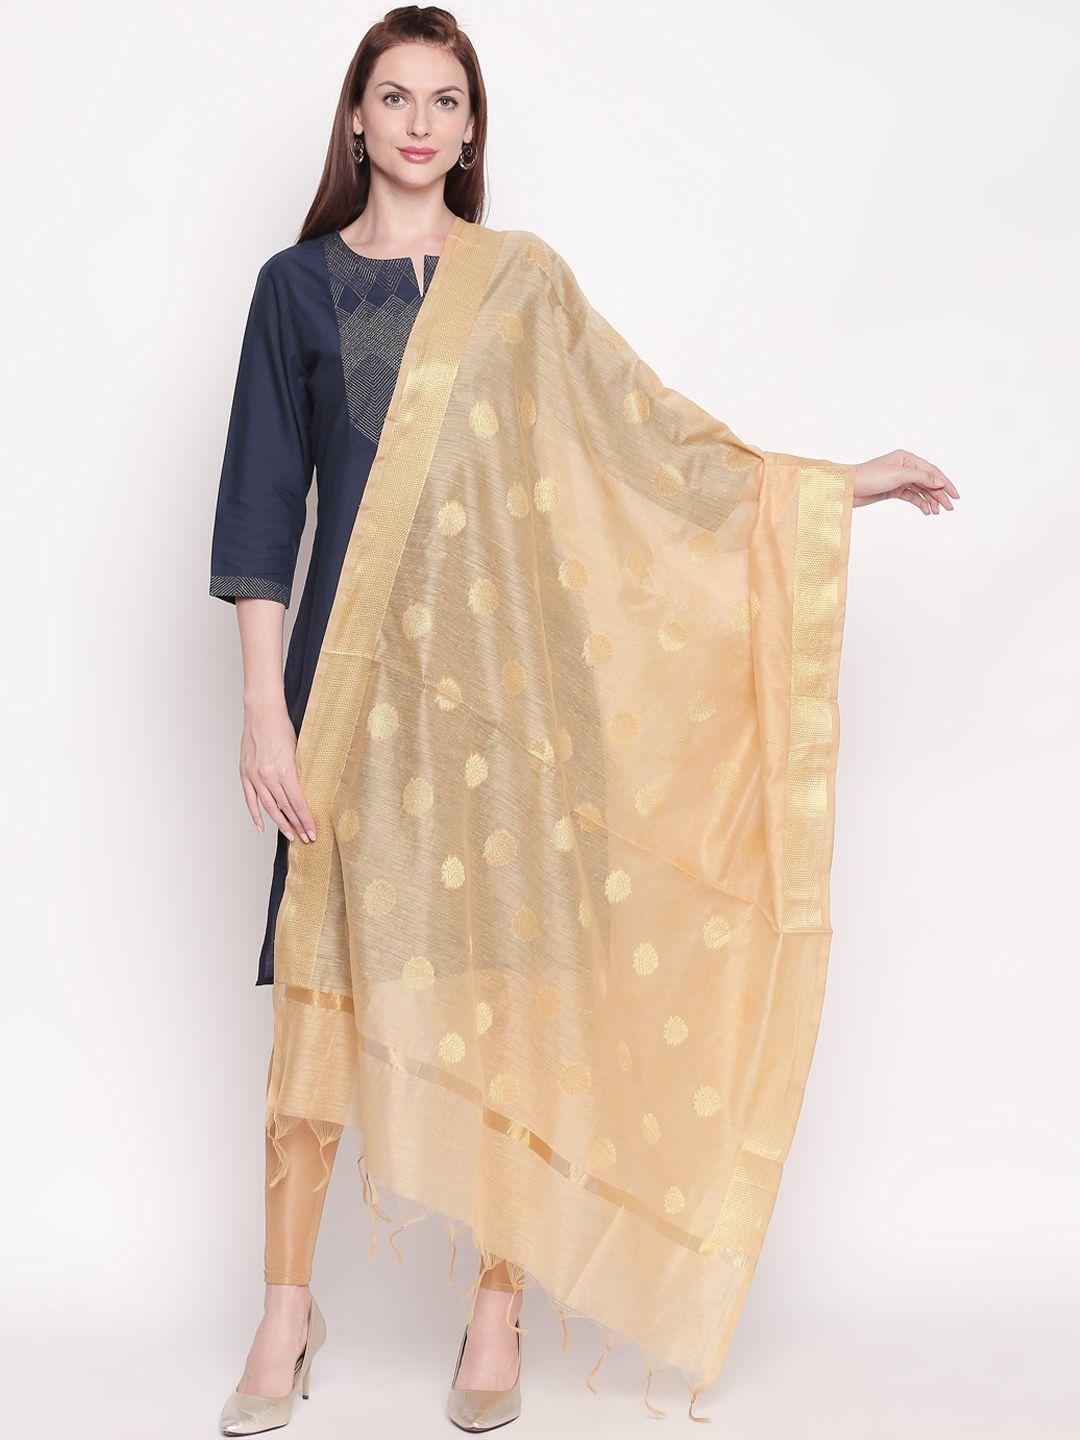 rangmanch by pantaloons gold-coloured embroidered dupatta